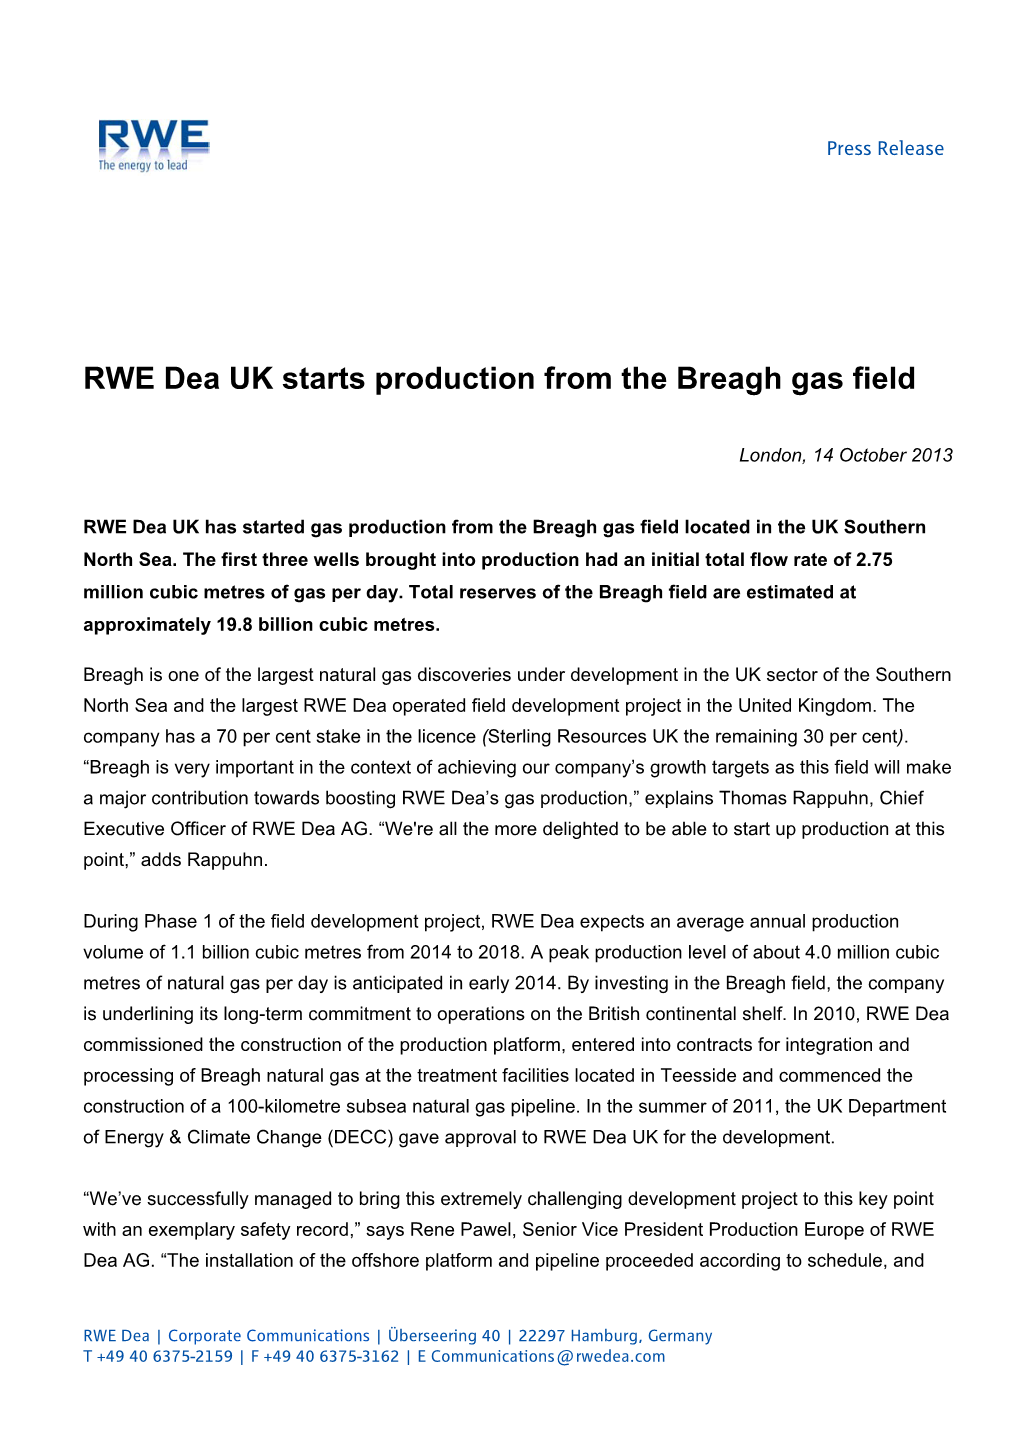 RWE Dea UK Starts Production from the Breagh Gas Field